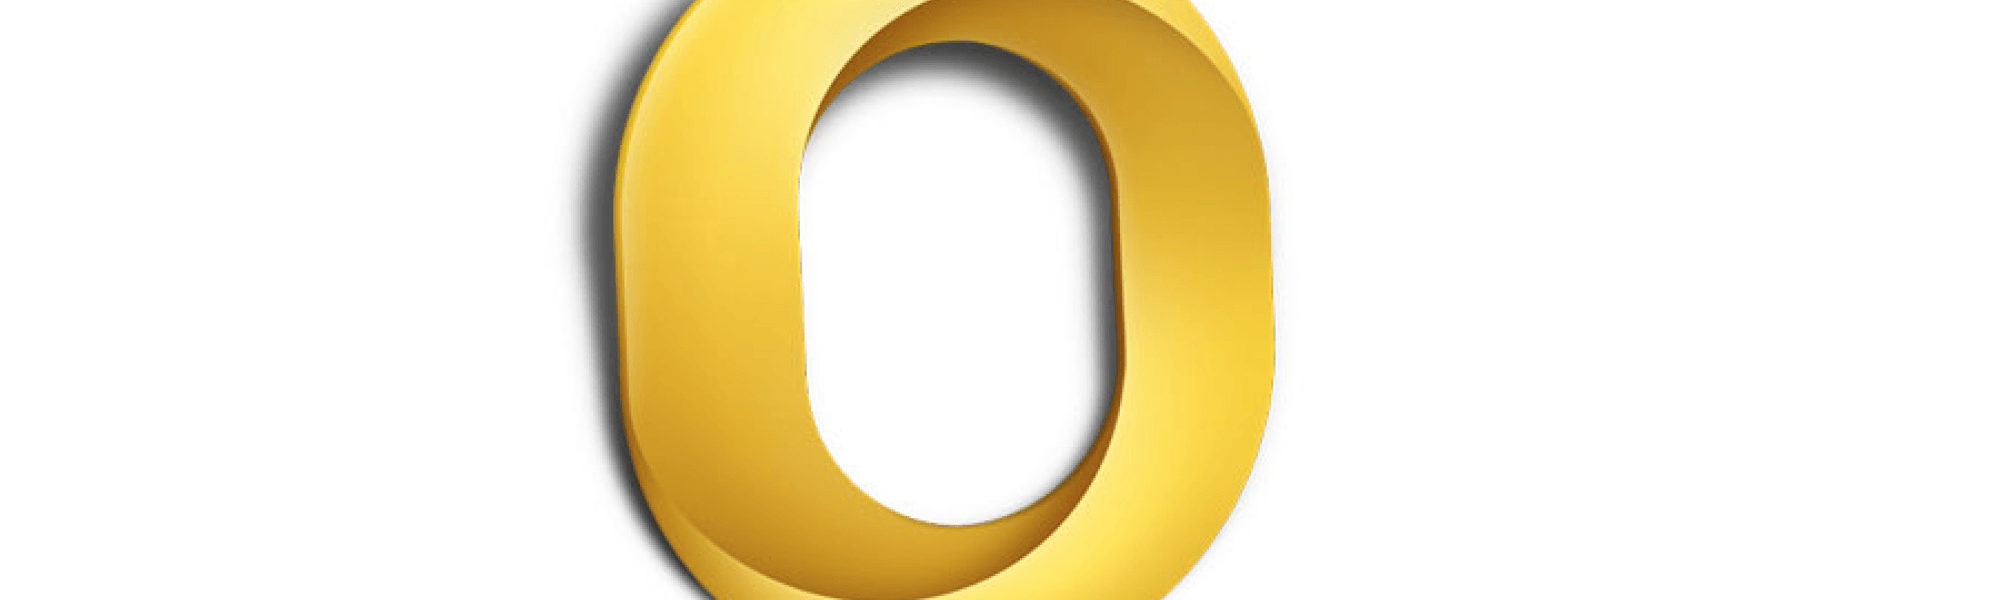 Yellow Outlook Logo - Outlook 2011 on Mac freezes and stops receiving email